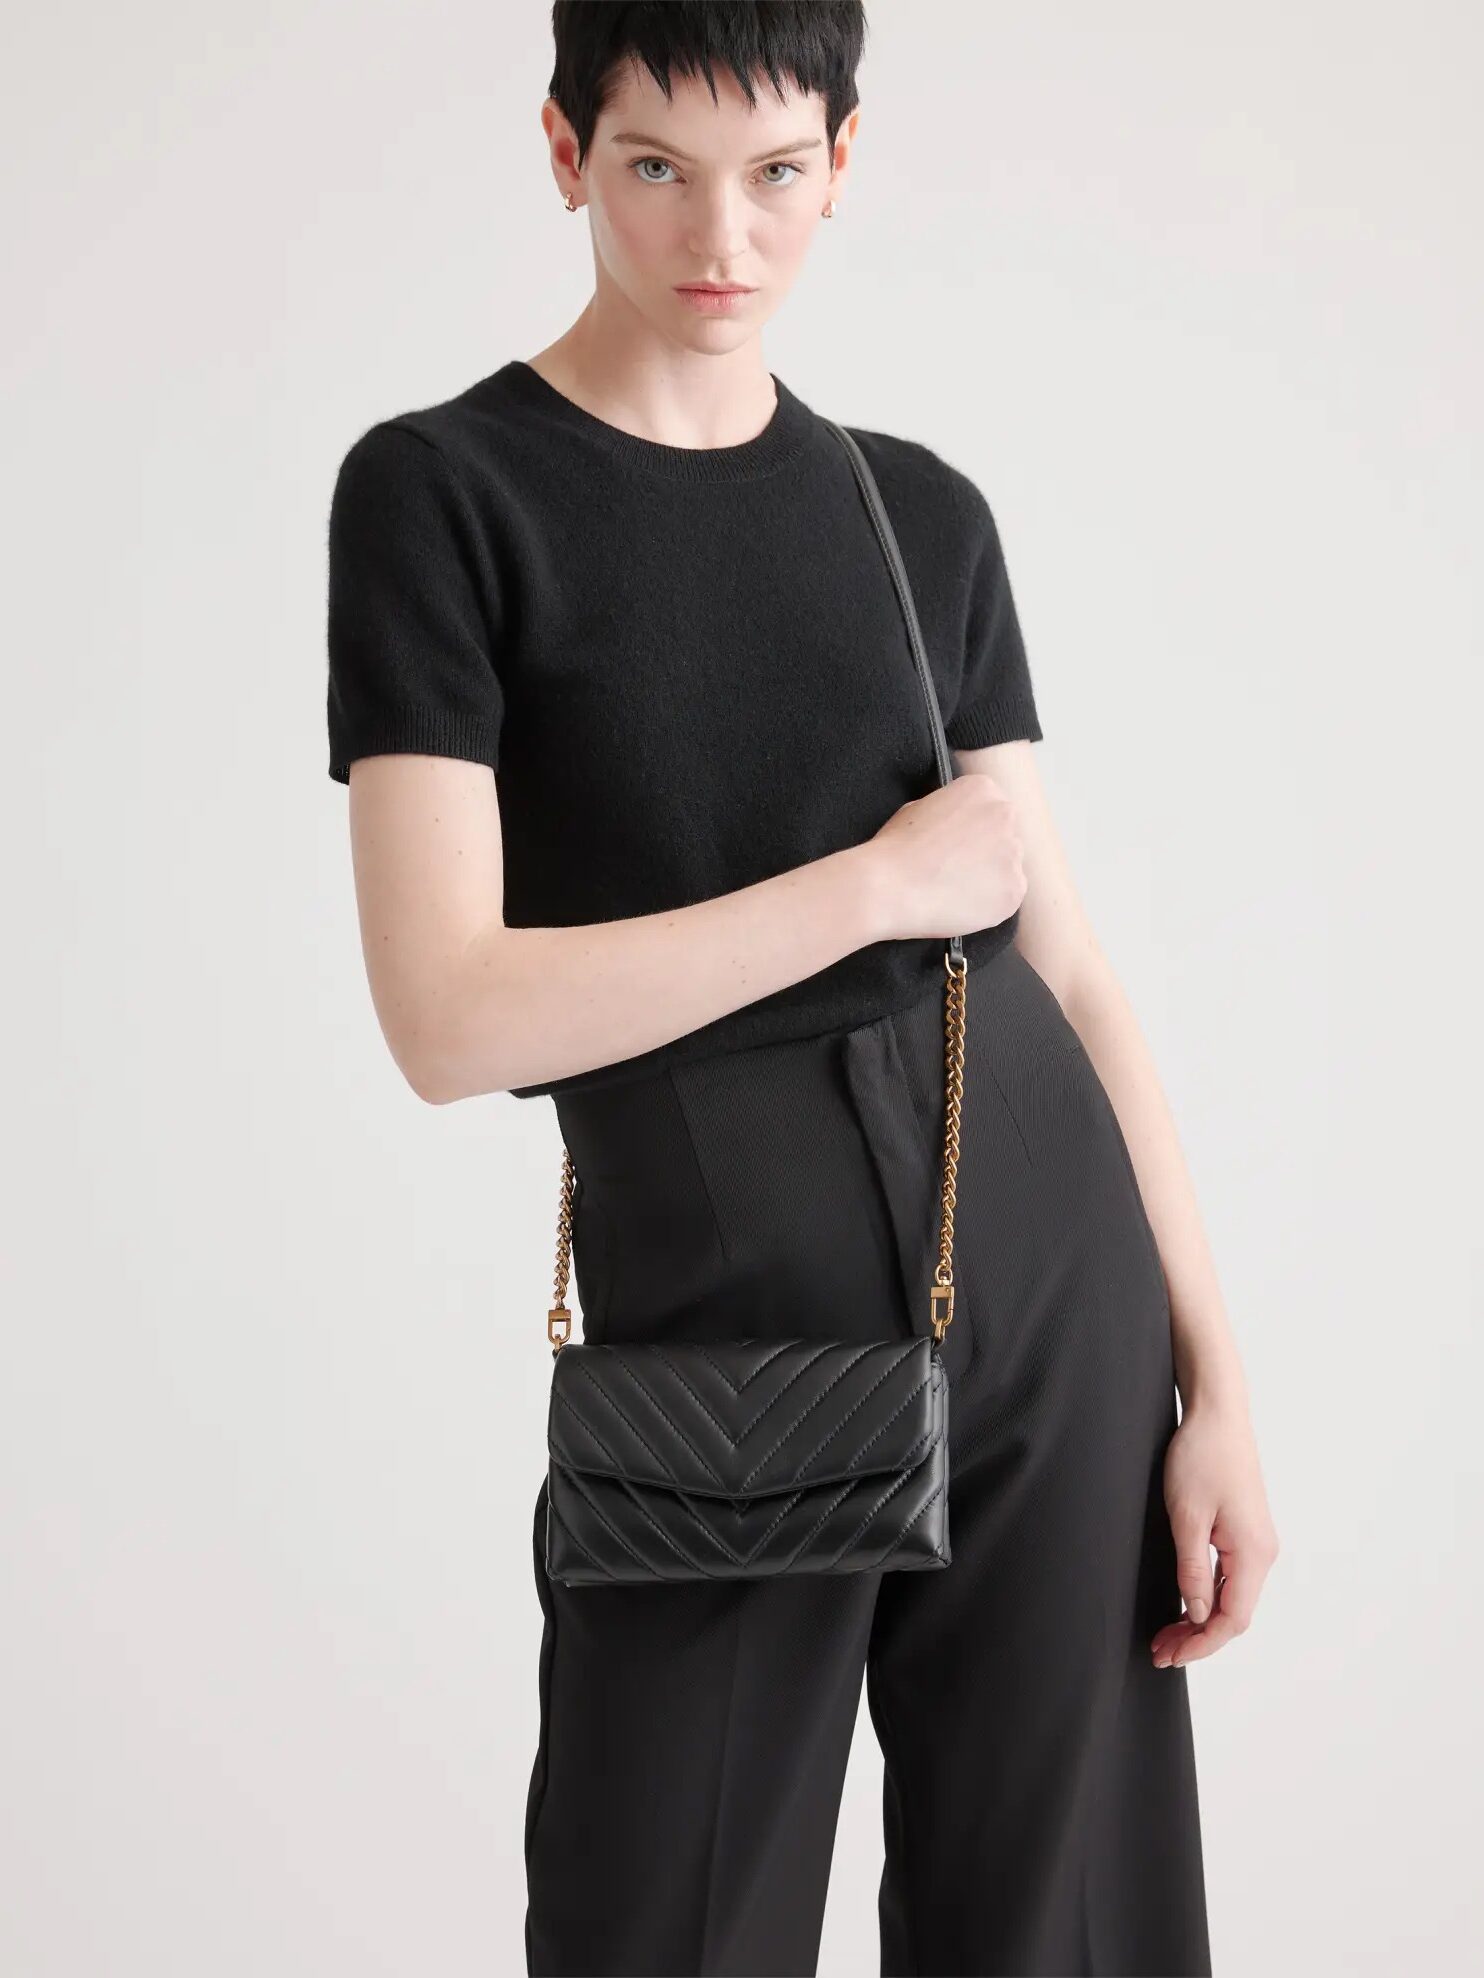 Woman posing with a black chain strap purse.